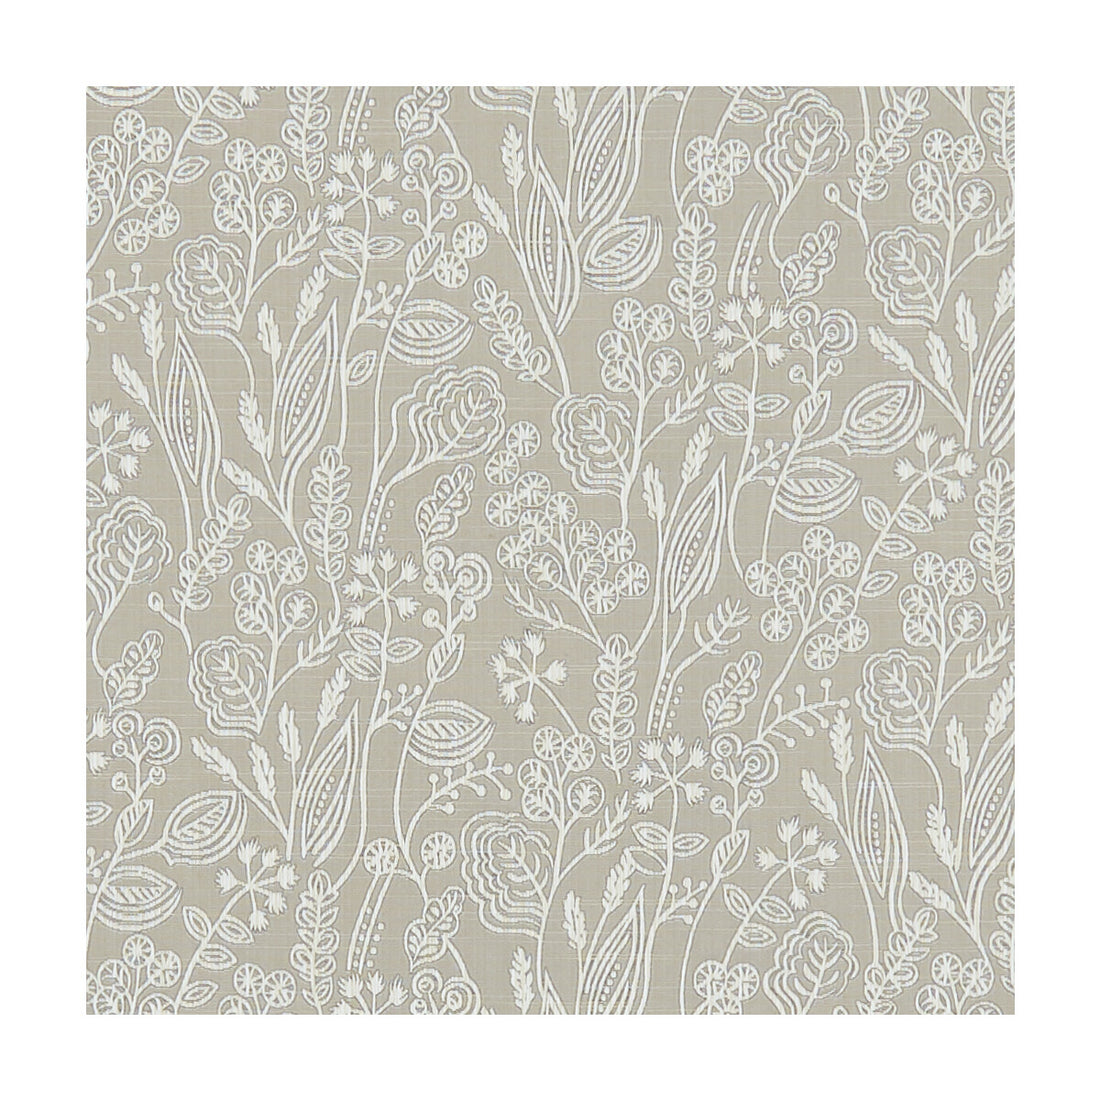 Marbury fabric in taupe color - pattern F1230/08.CAC.0 - by Clarke And Clarke in the Marbury By Studio G For C&amp;C collection